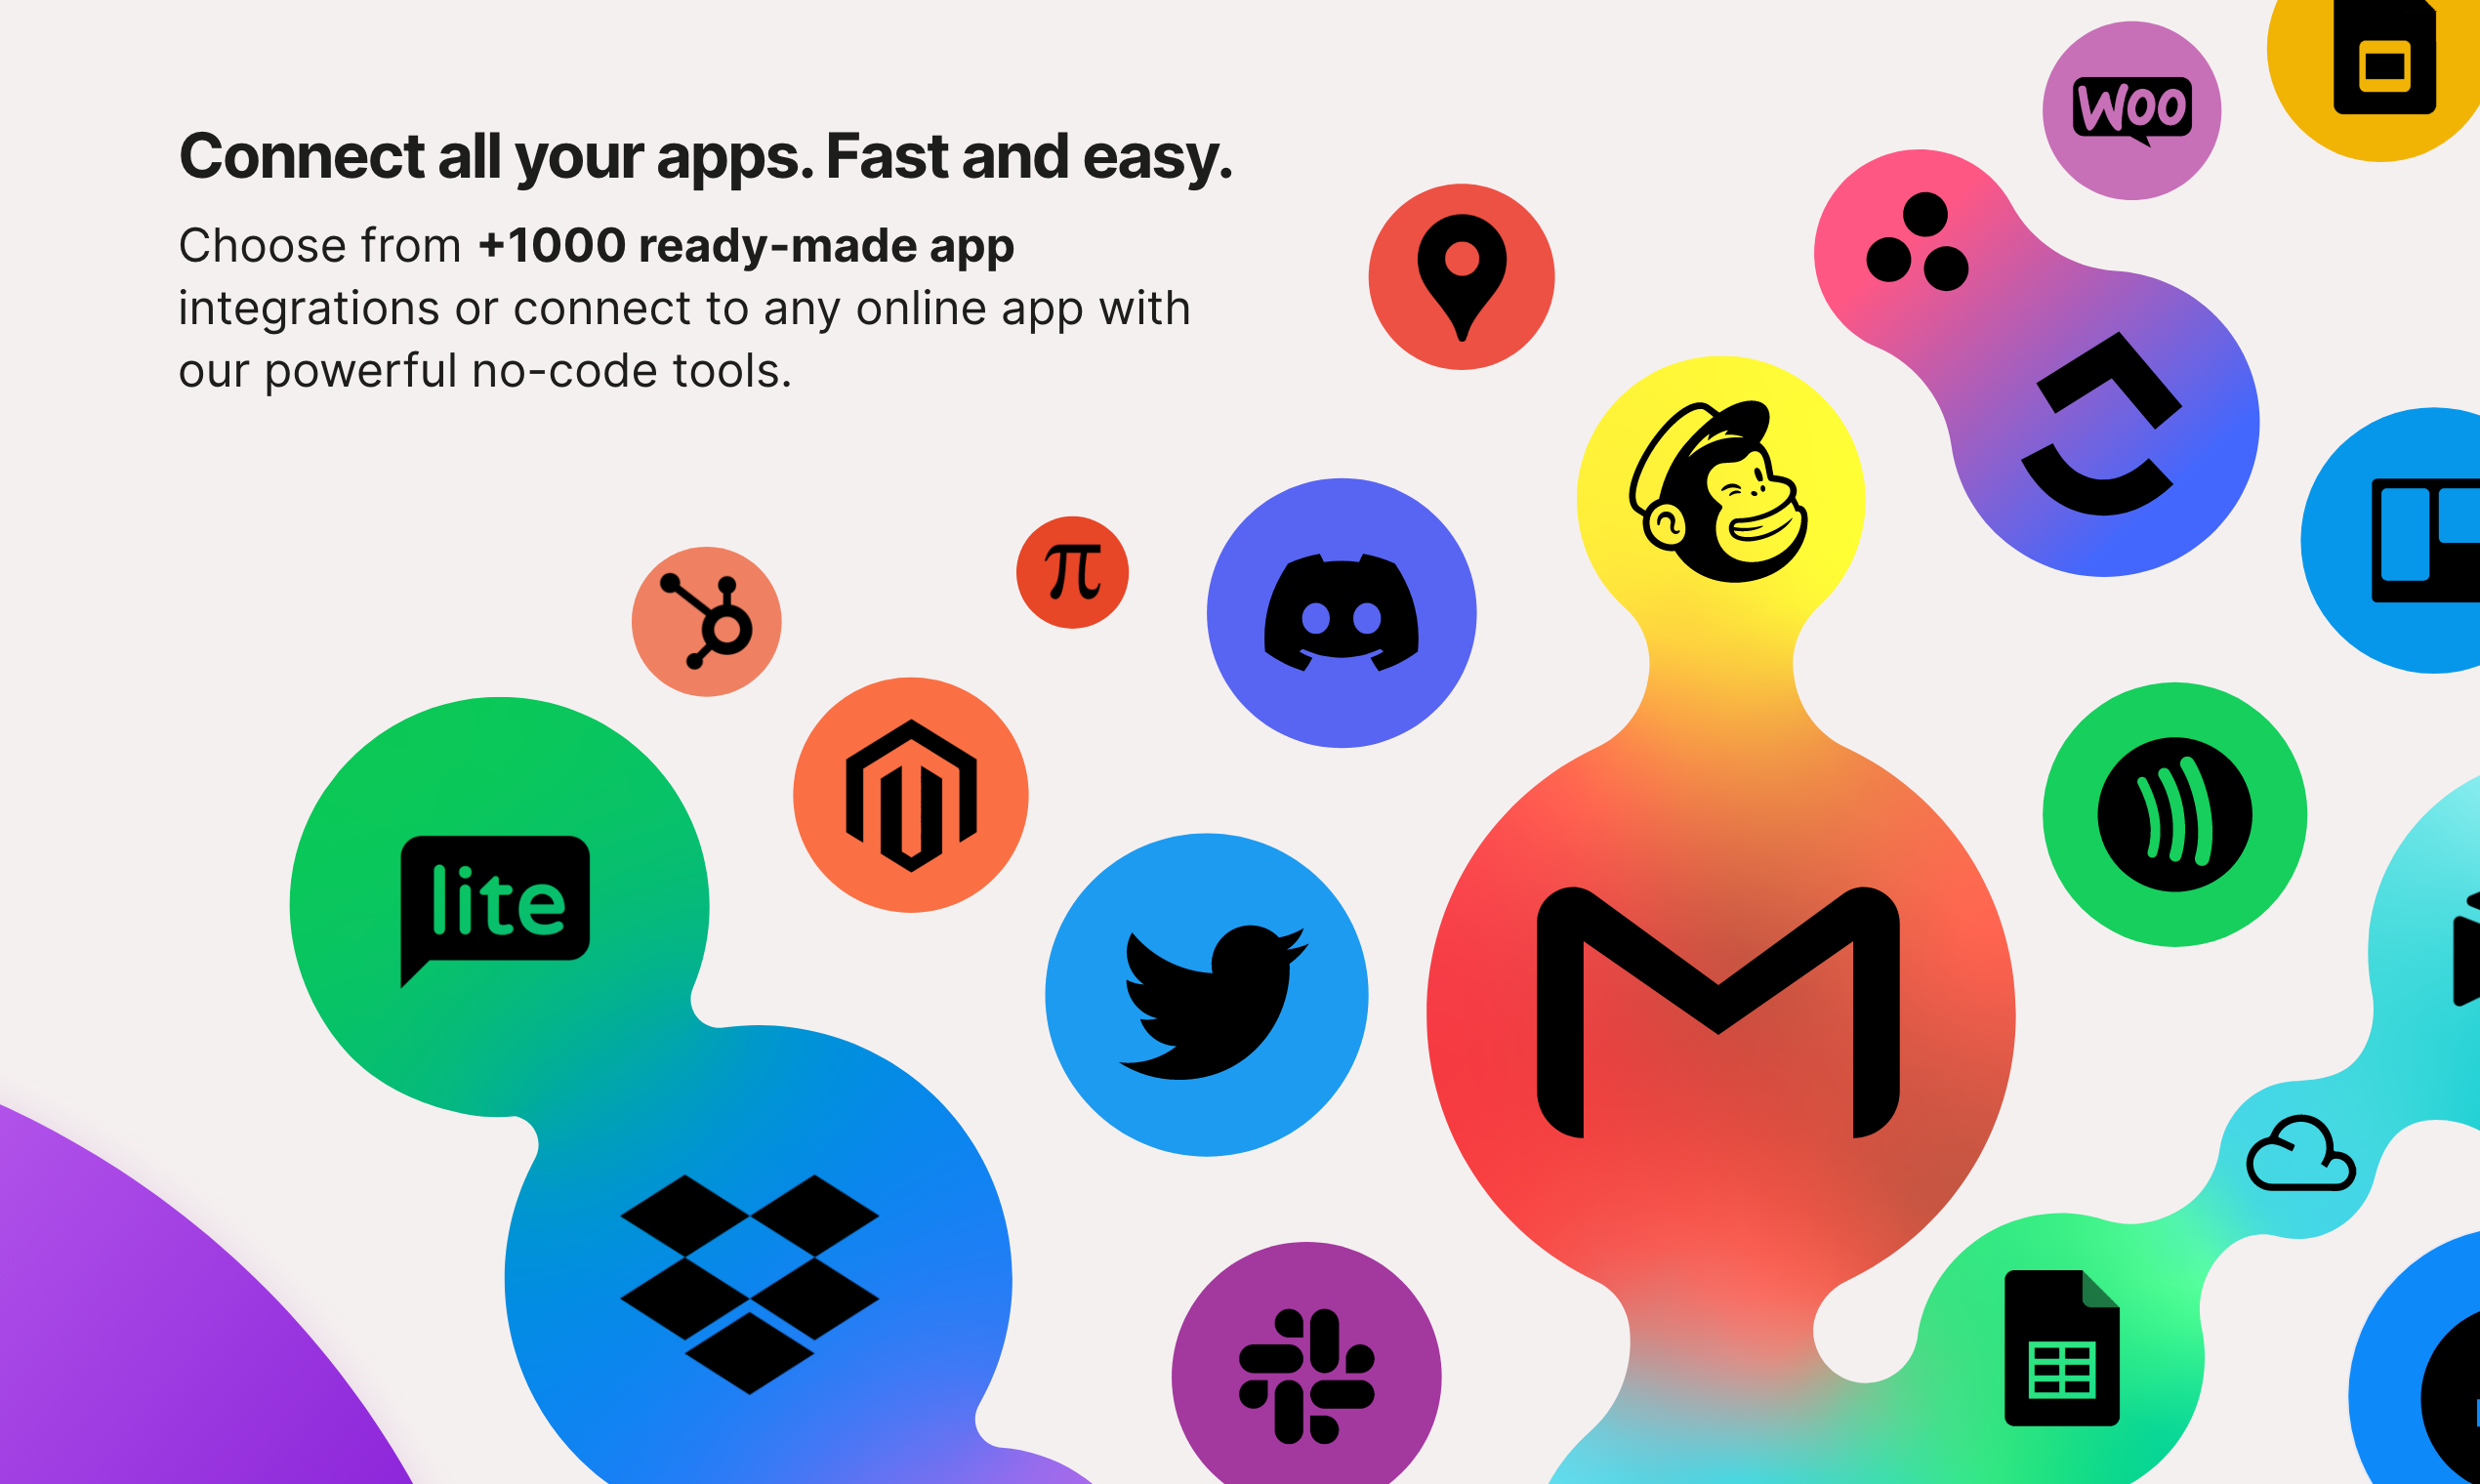 Connect all your apps. Fast and easy.